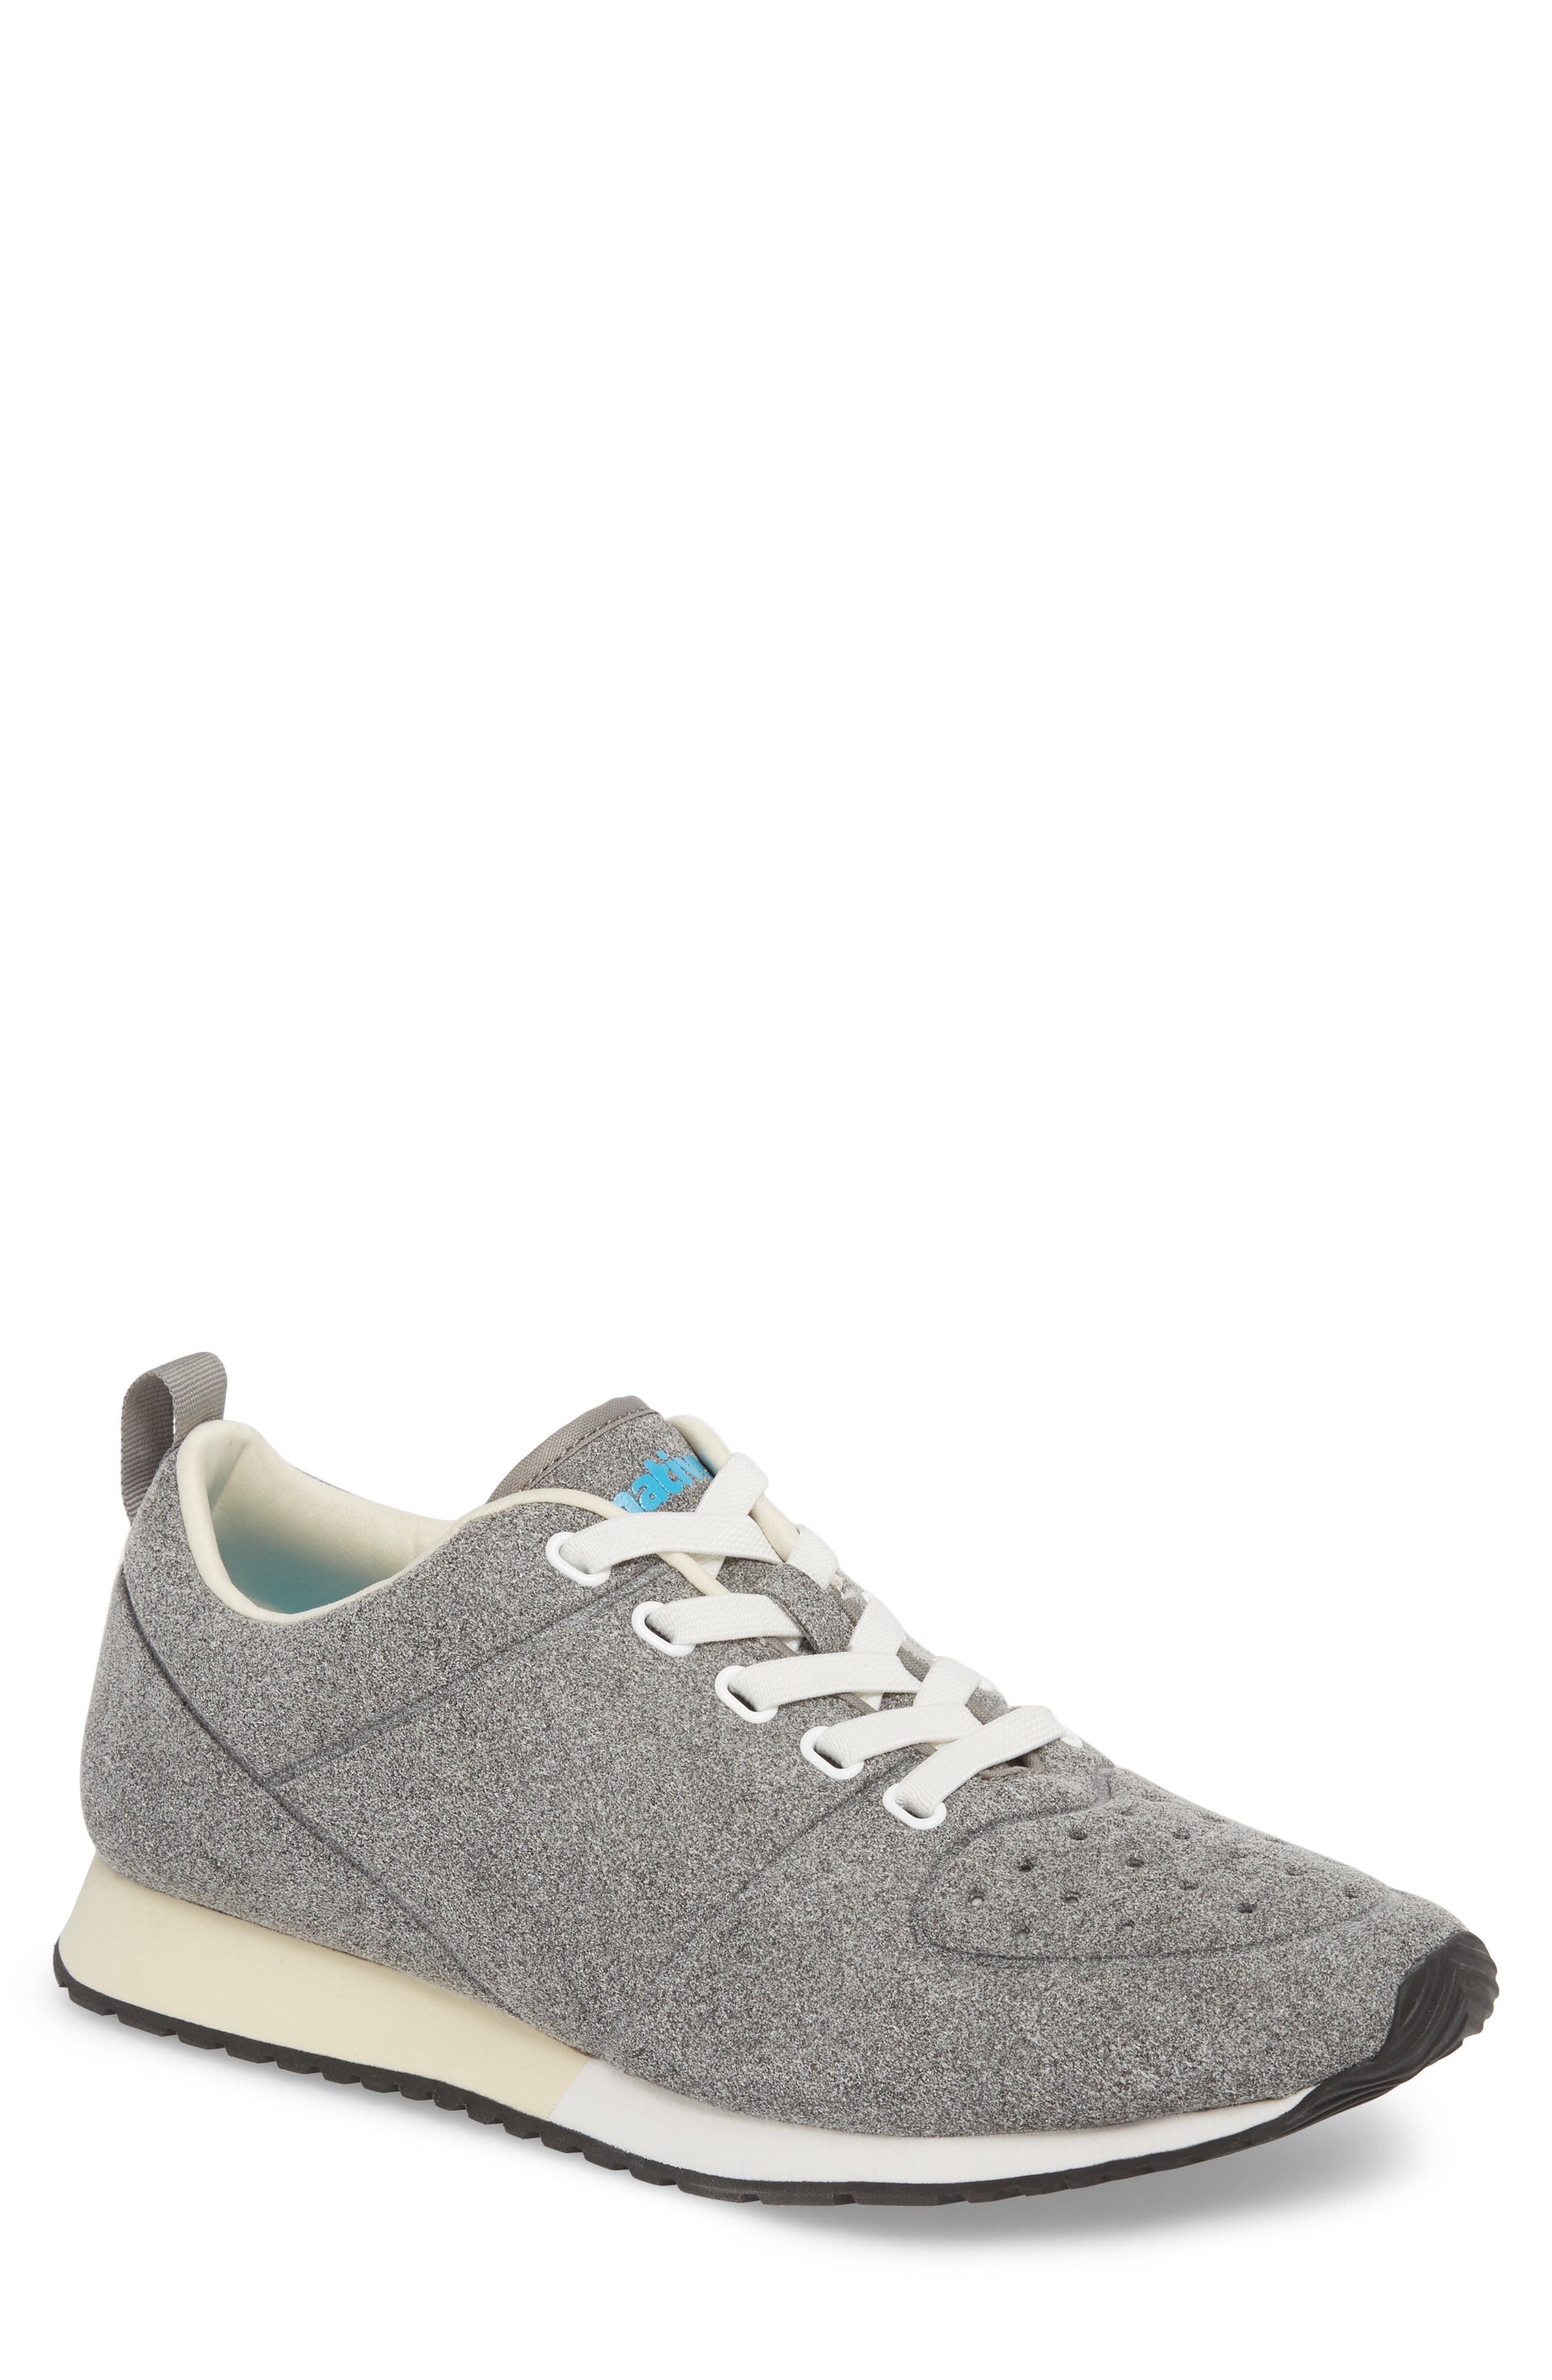 native cornell perforated sneaker